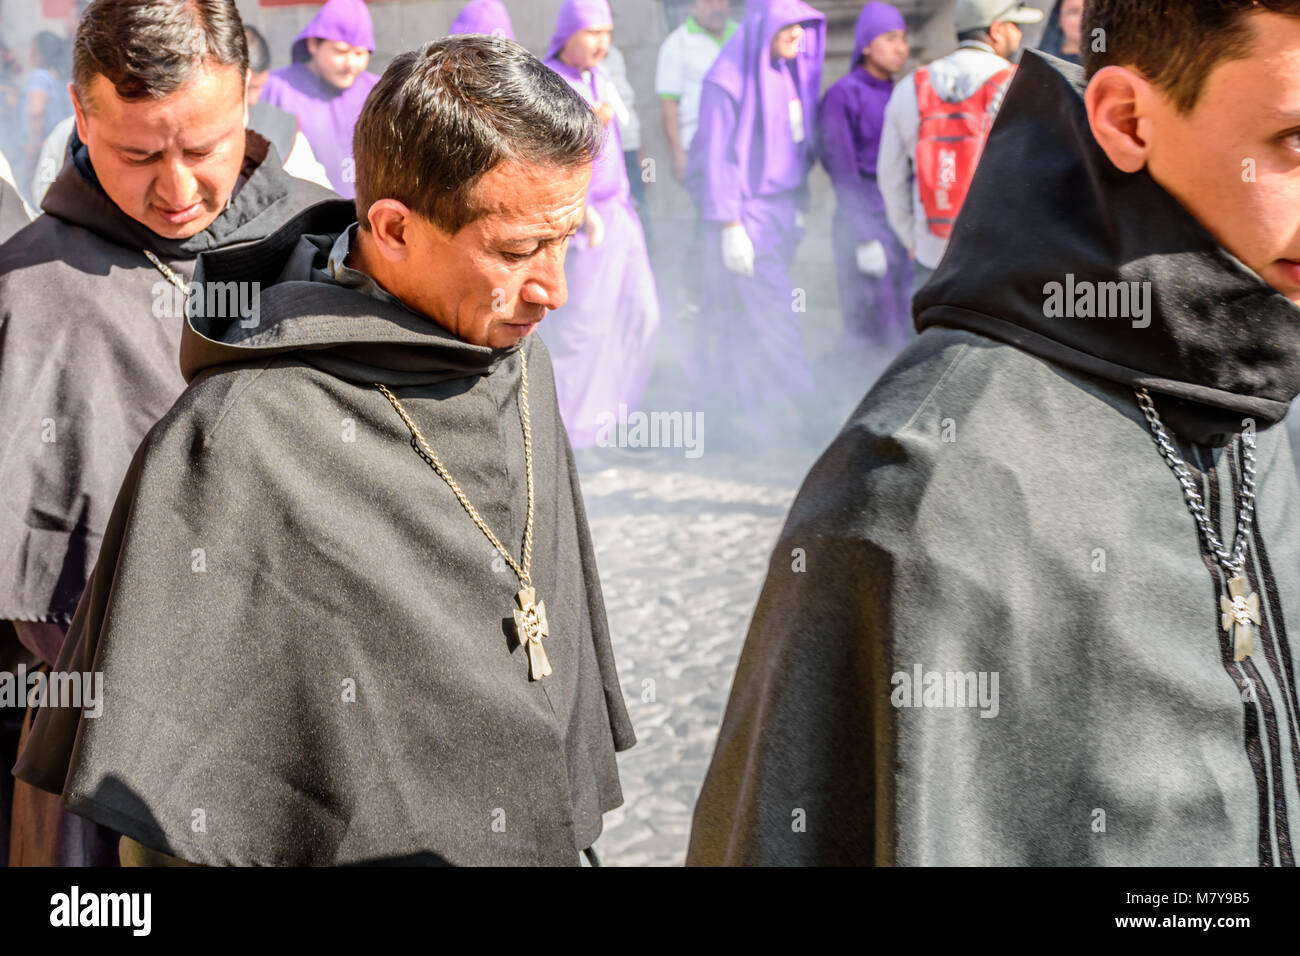 Antigua, Guatemala -  February 18, 2018: Procession on first Sunday of Lent in town with most famous Holy Week celebrations in Latin America Stock Photo